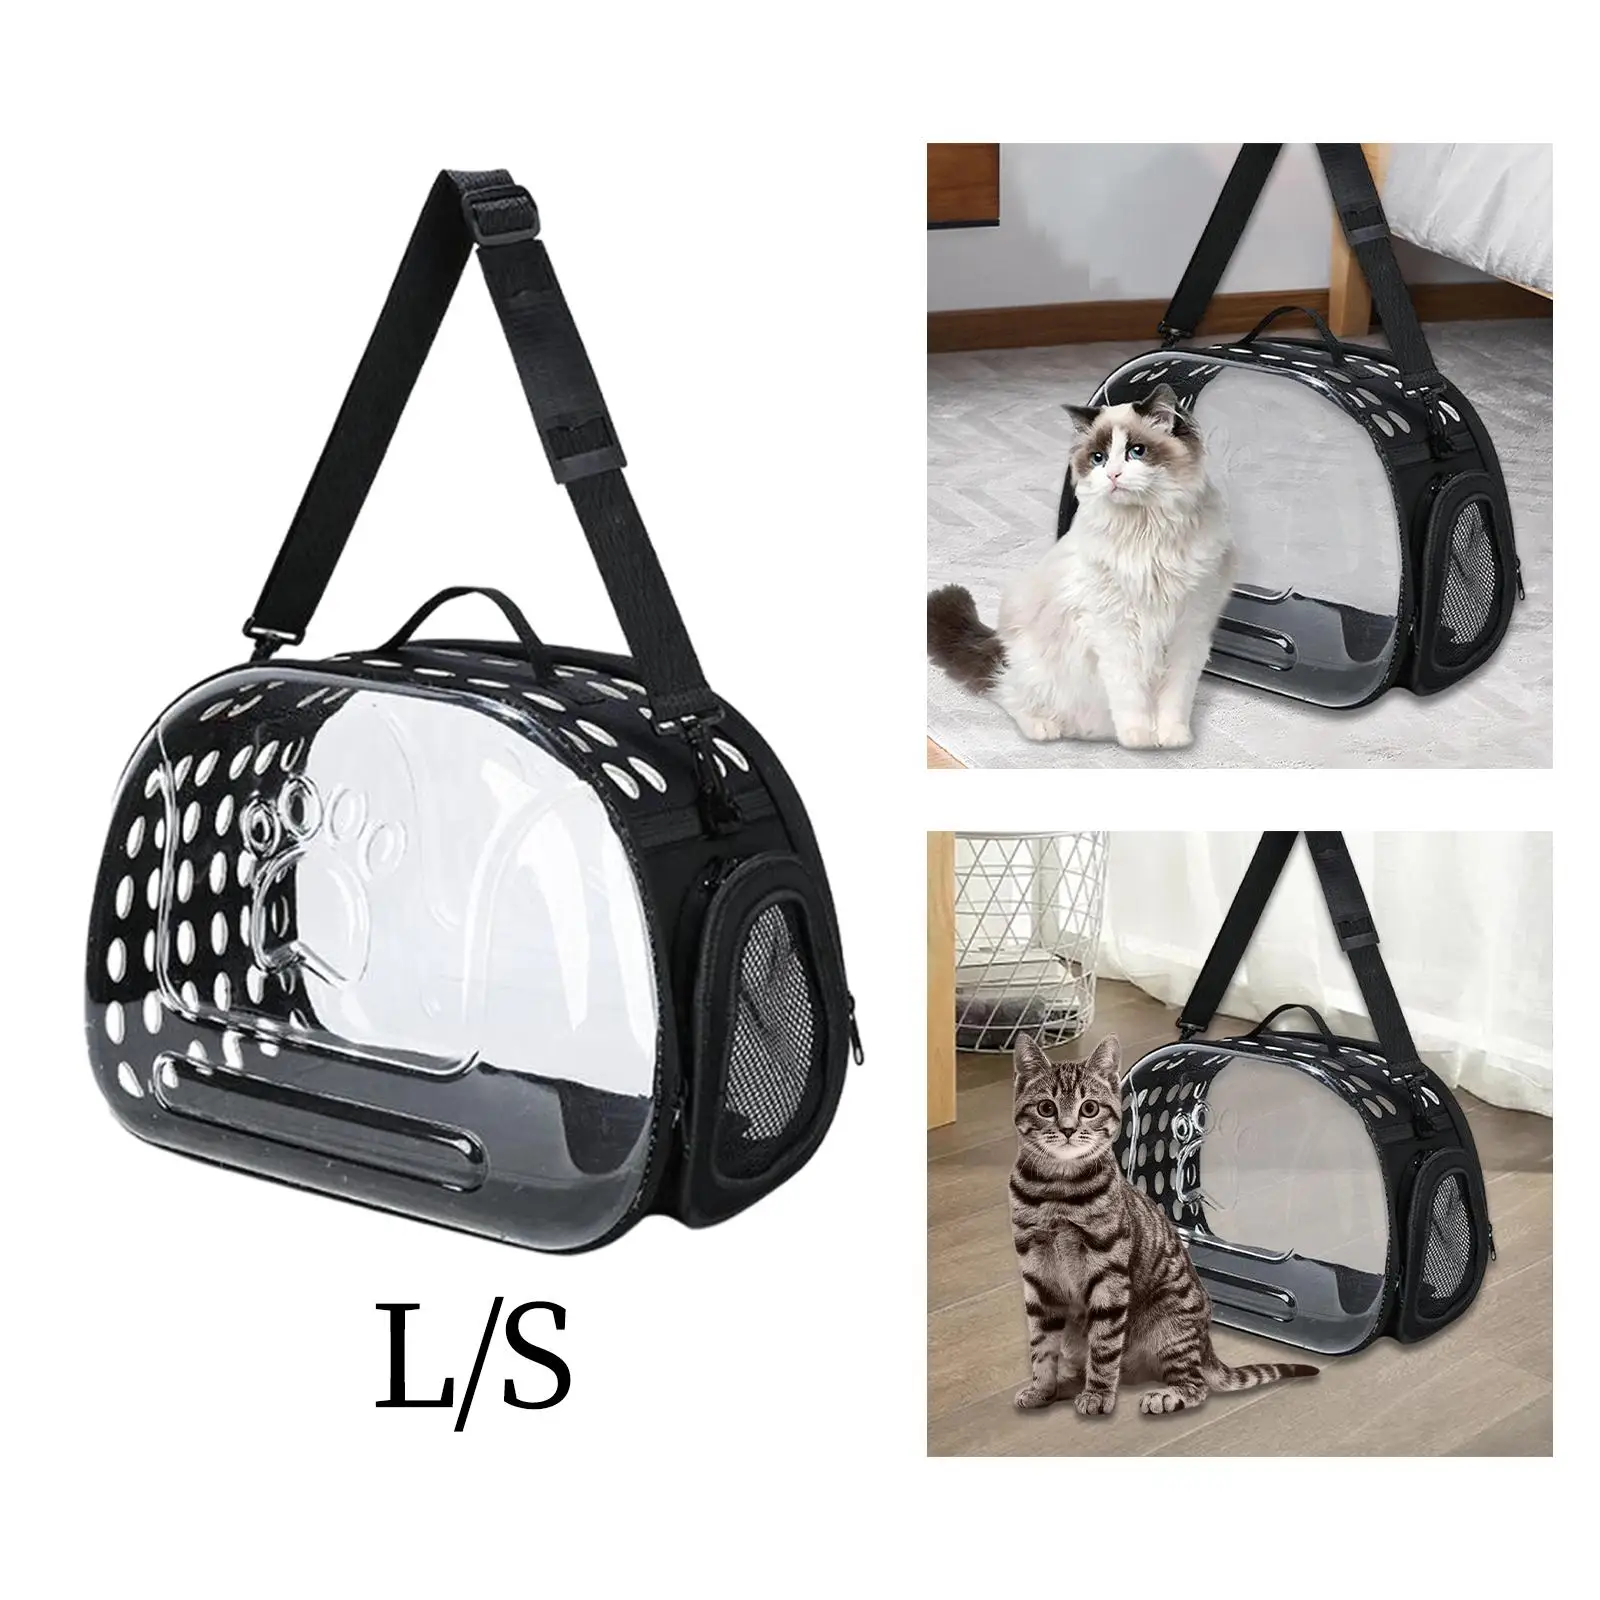 Portable Cat Carried Bag Carry Kennel Ventilated Travel Pet Bubble Backpack for Outdoor Kitten Travel Walking Small Medium Dogs